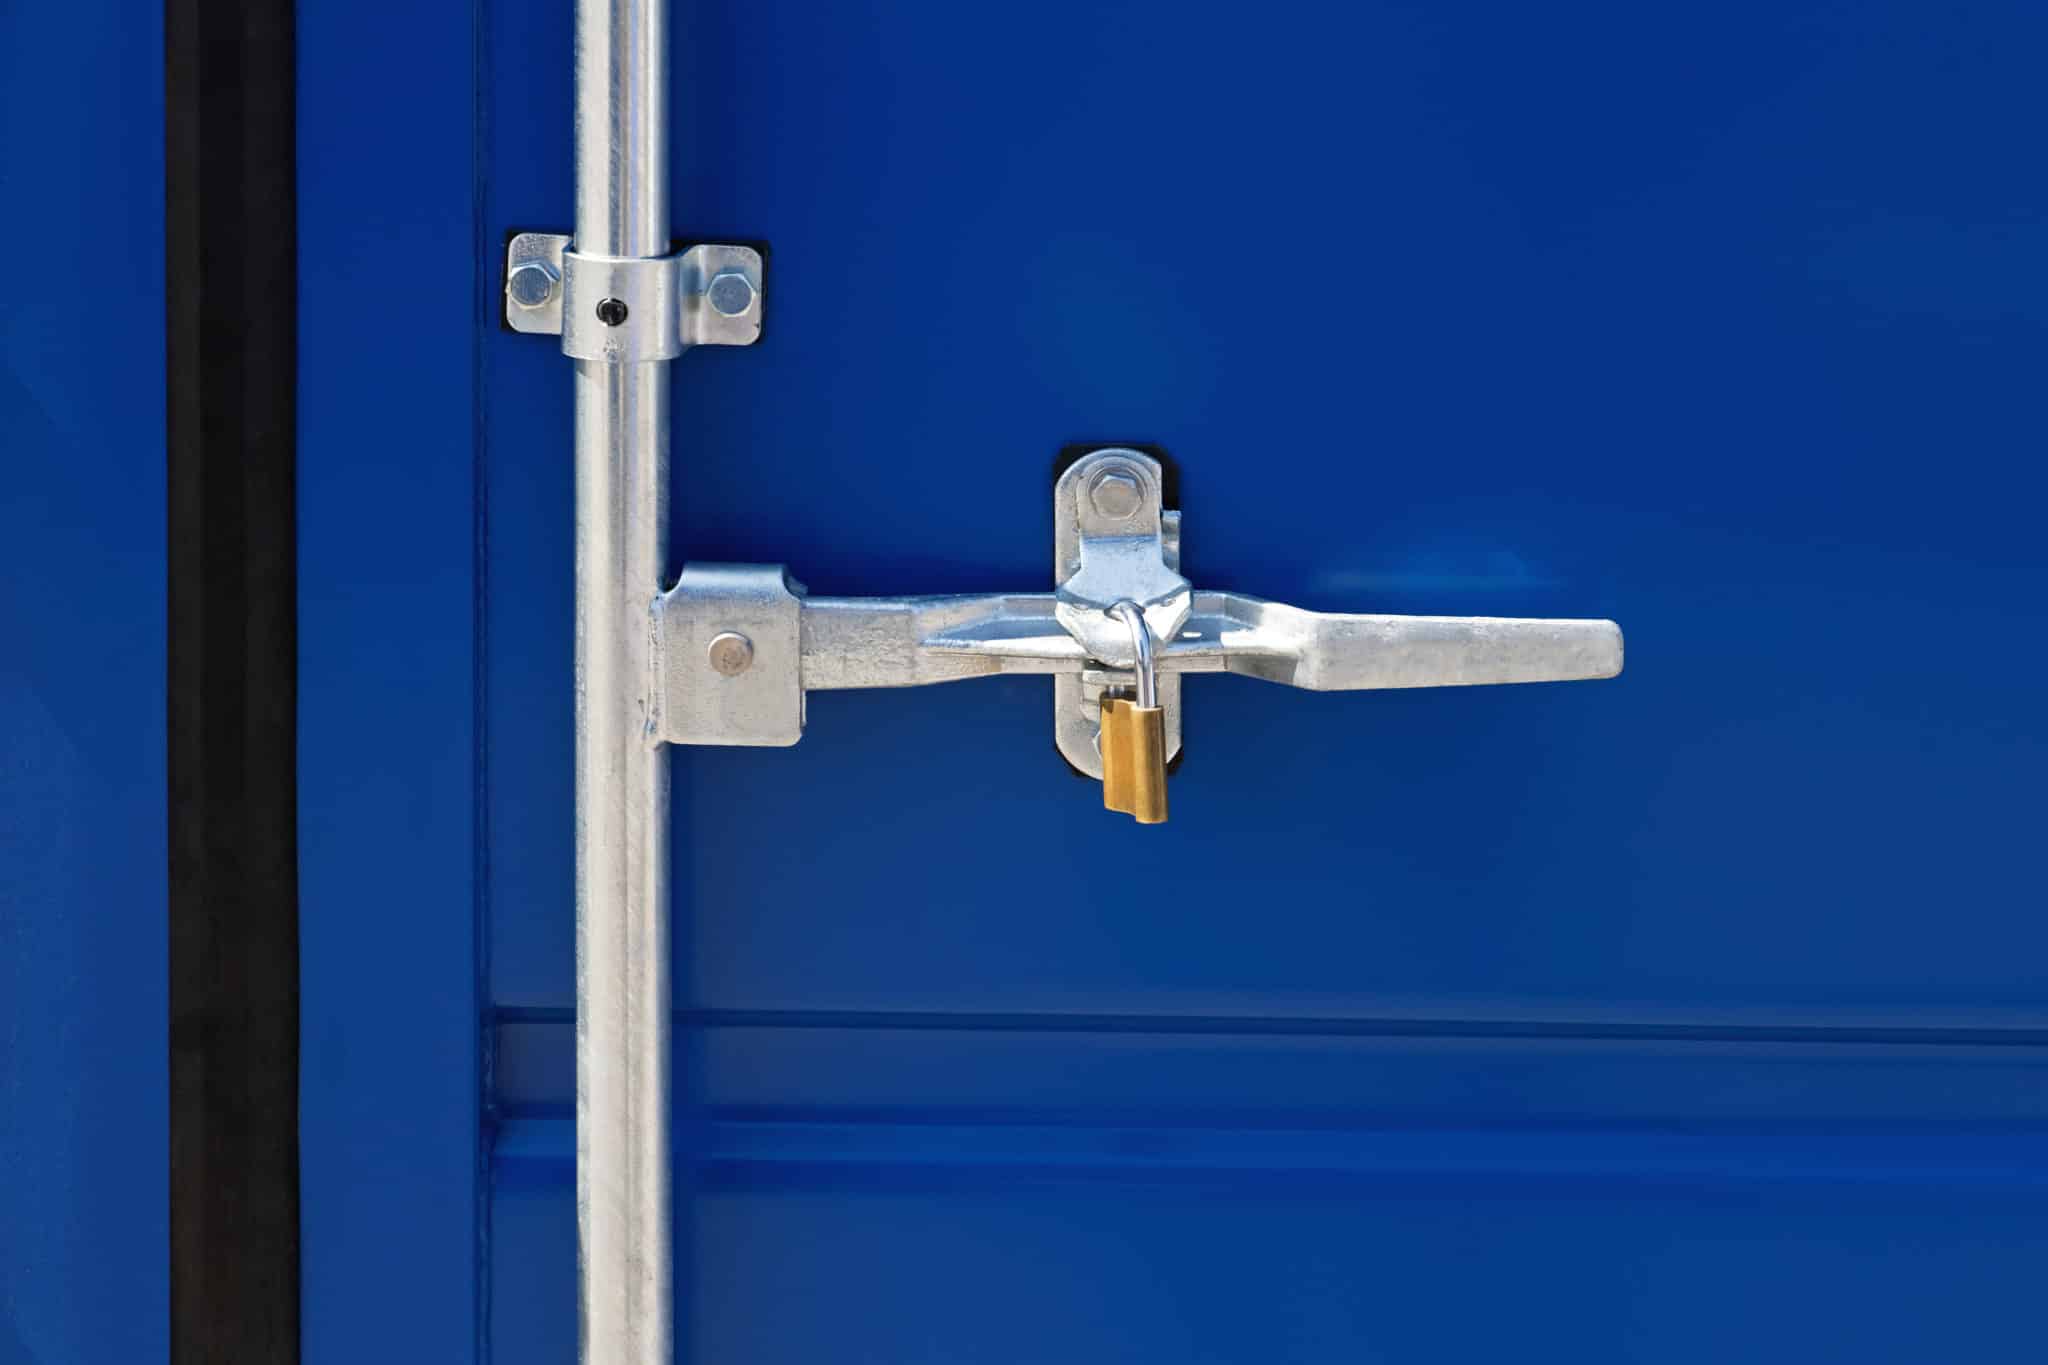 https://tscok.com/wp-content/uploads/2021/06/shipping-container-locks-scaled.jpeg